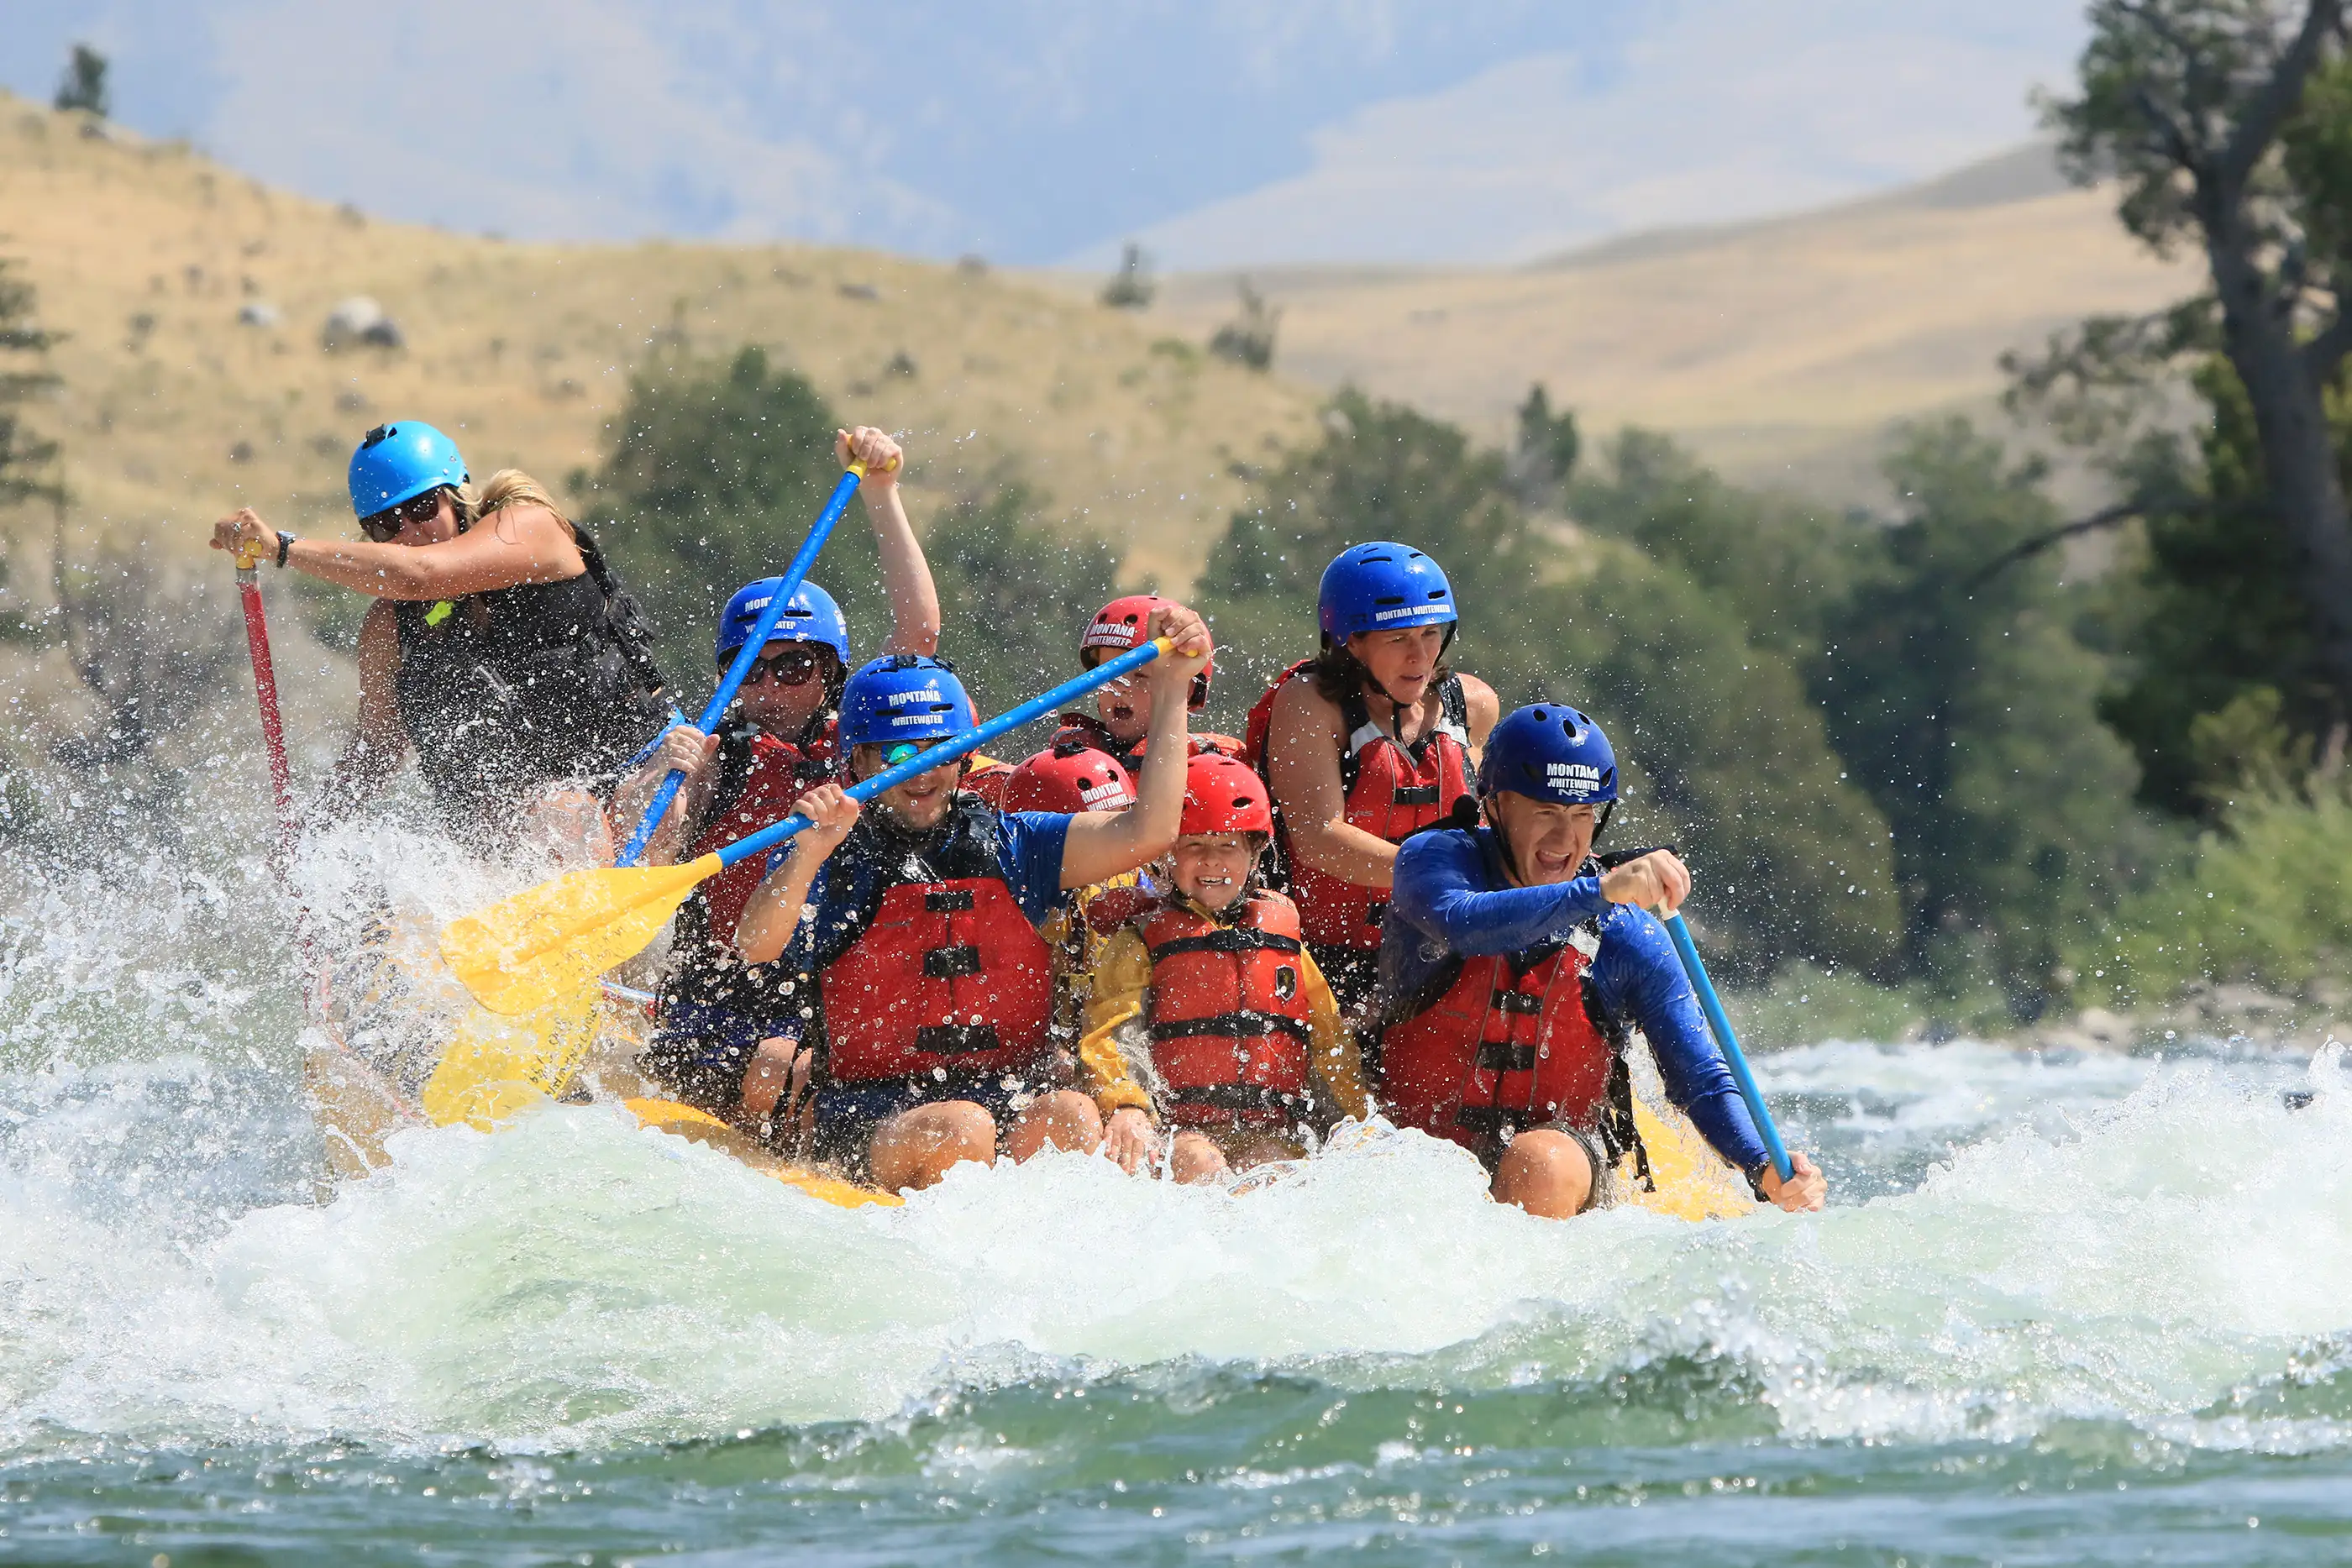 Montana Whitewater half-day whitewater rafting trip on the Yellowstone River